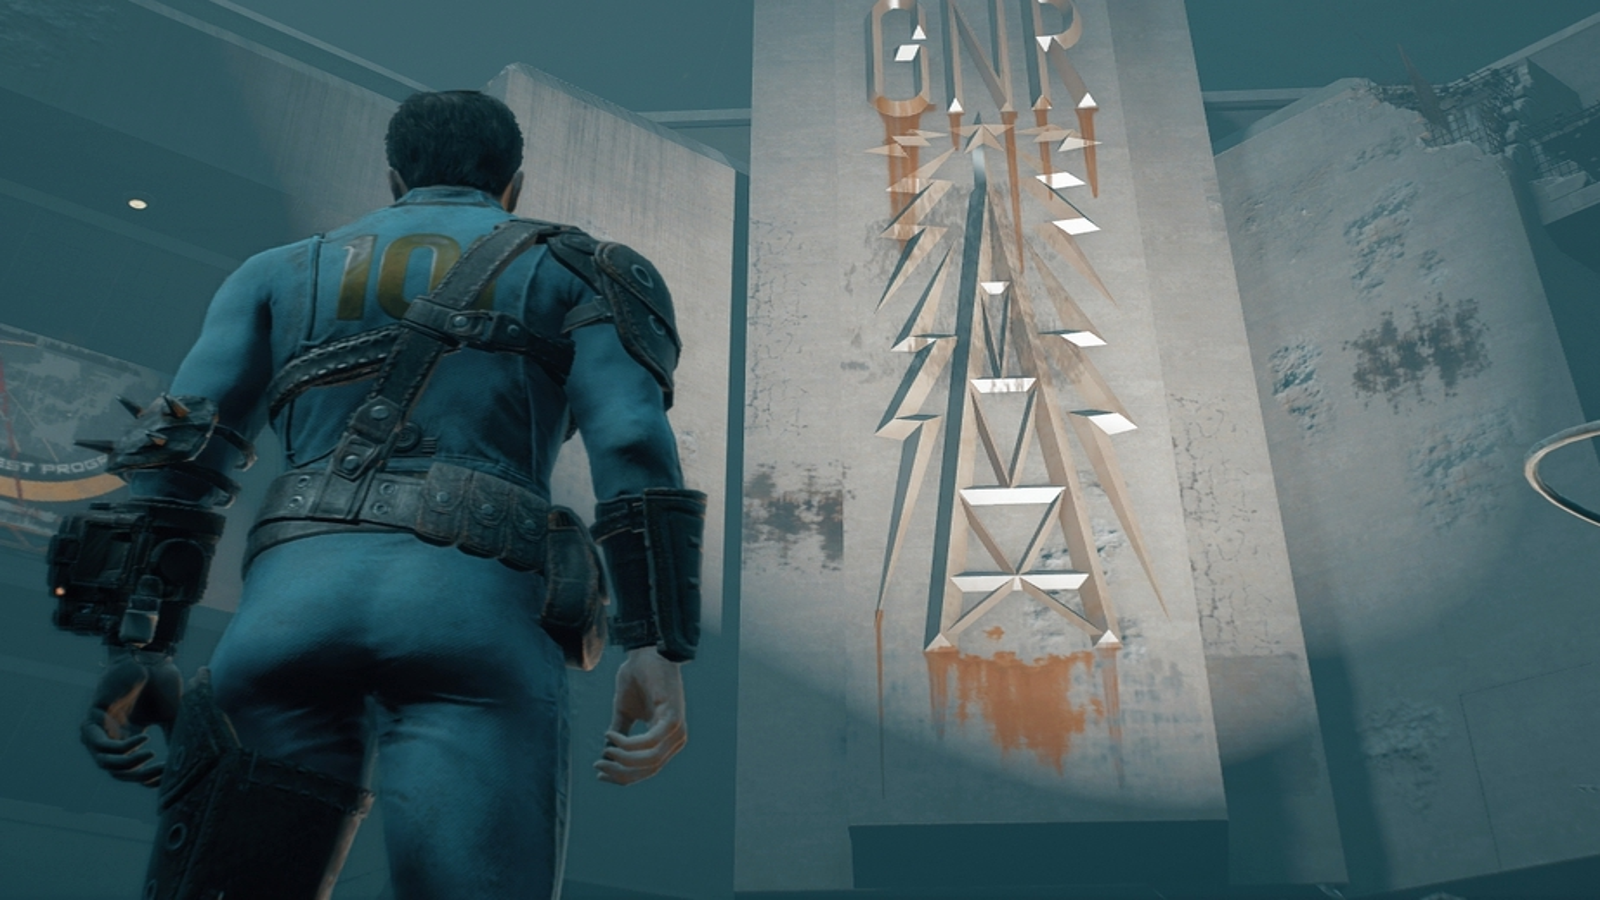 Have a look at Fallout 3 remade in Fallout 4 before Bethesda inevitably  shuts it down < NAG